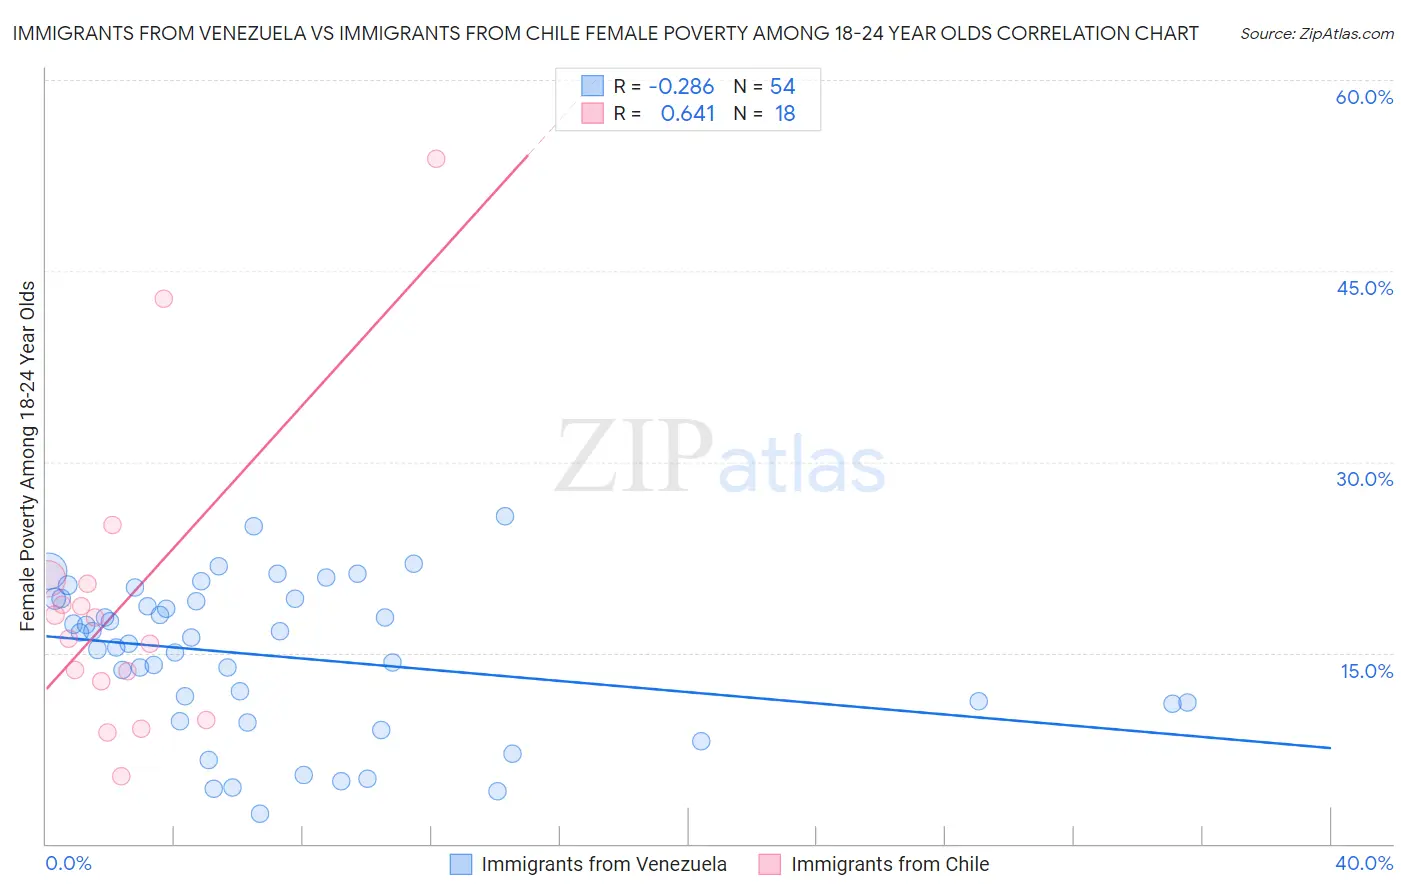 Immigrants from Venezuela vs Immigrants from Chile Female Poverty Among 18-24 Year Olds